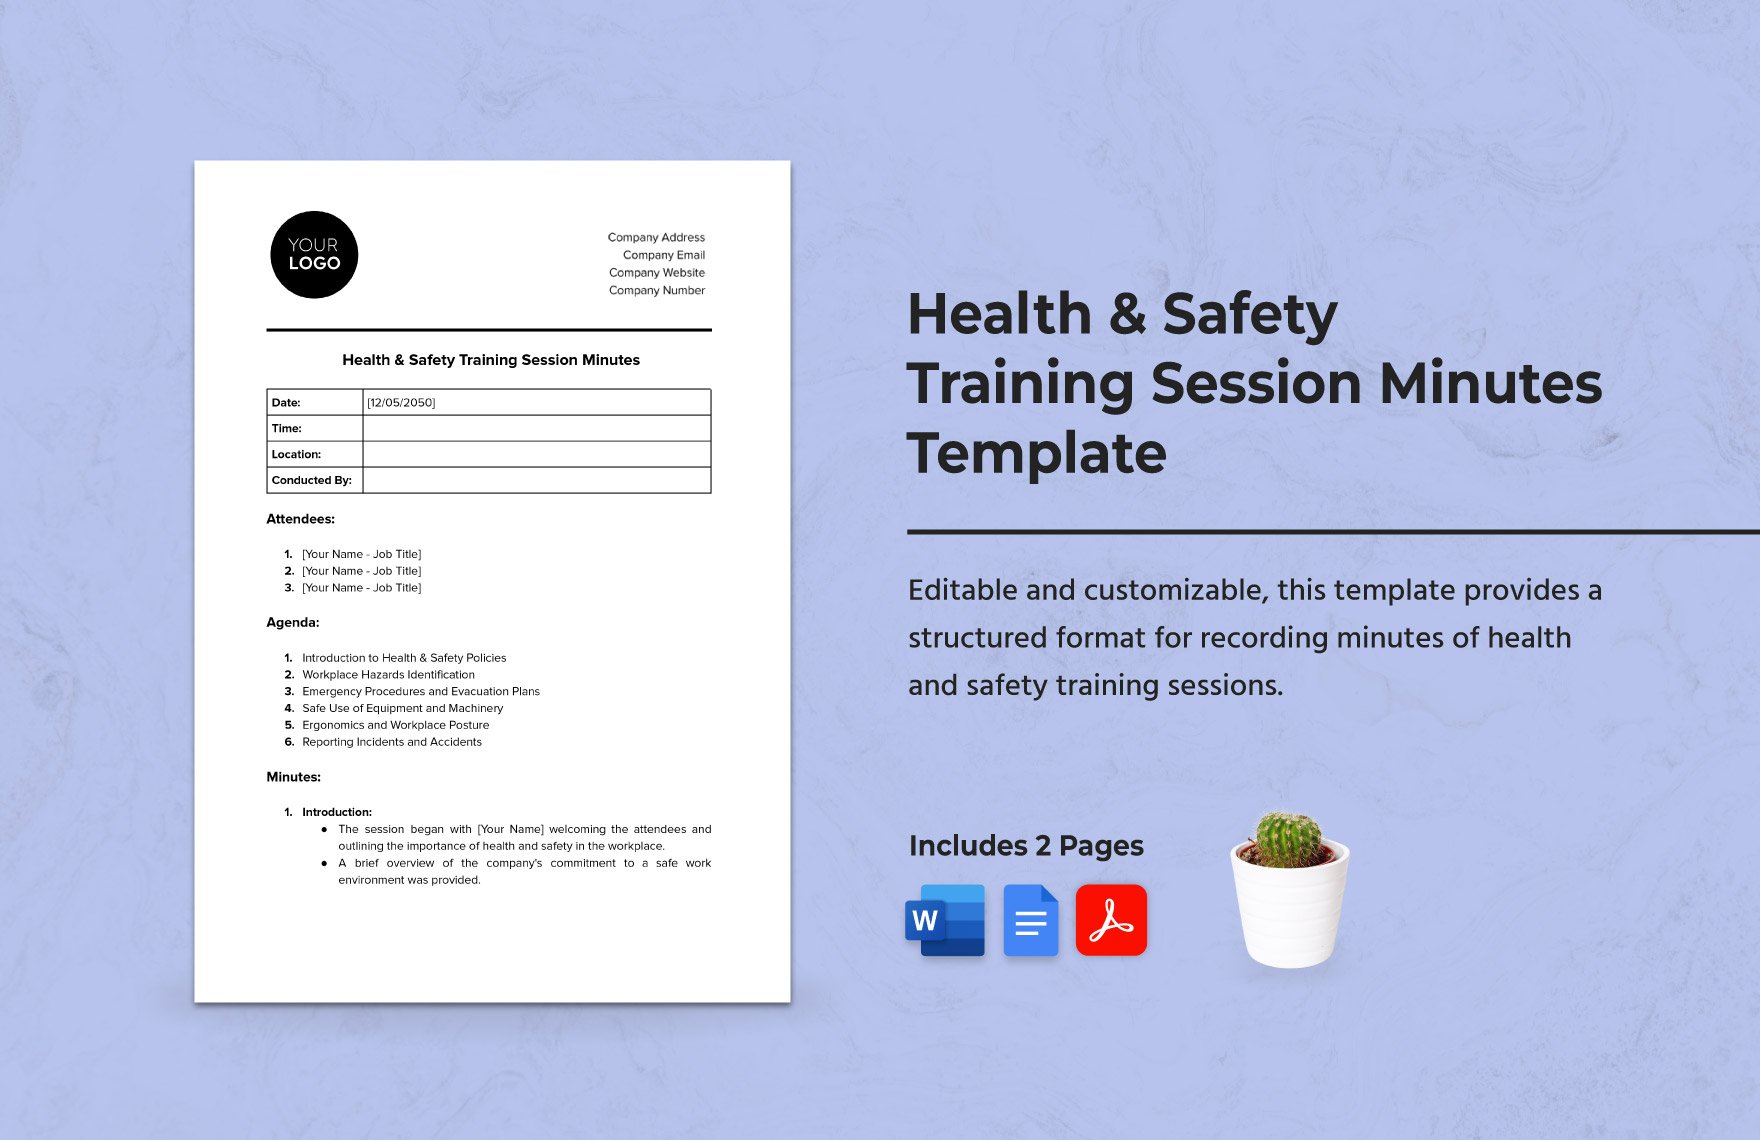 Health & Safety Training Session Minutes Template in Word, Google Docs, PDF